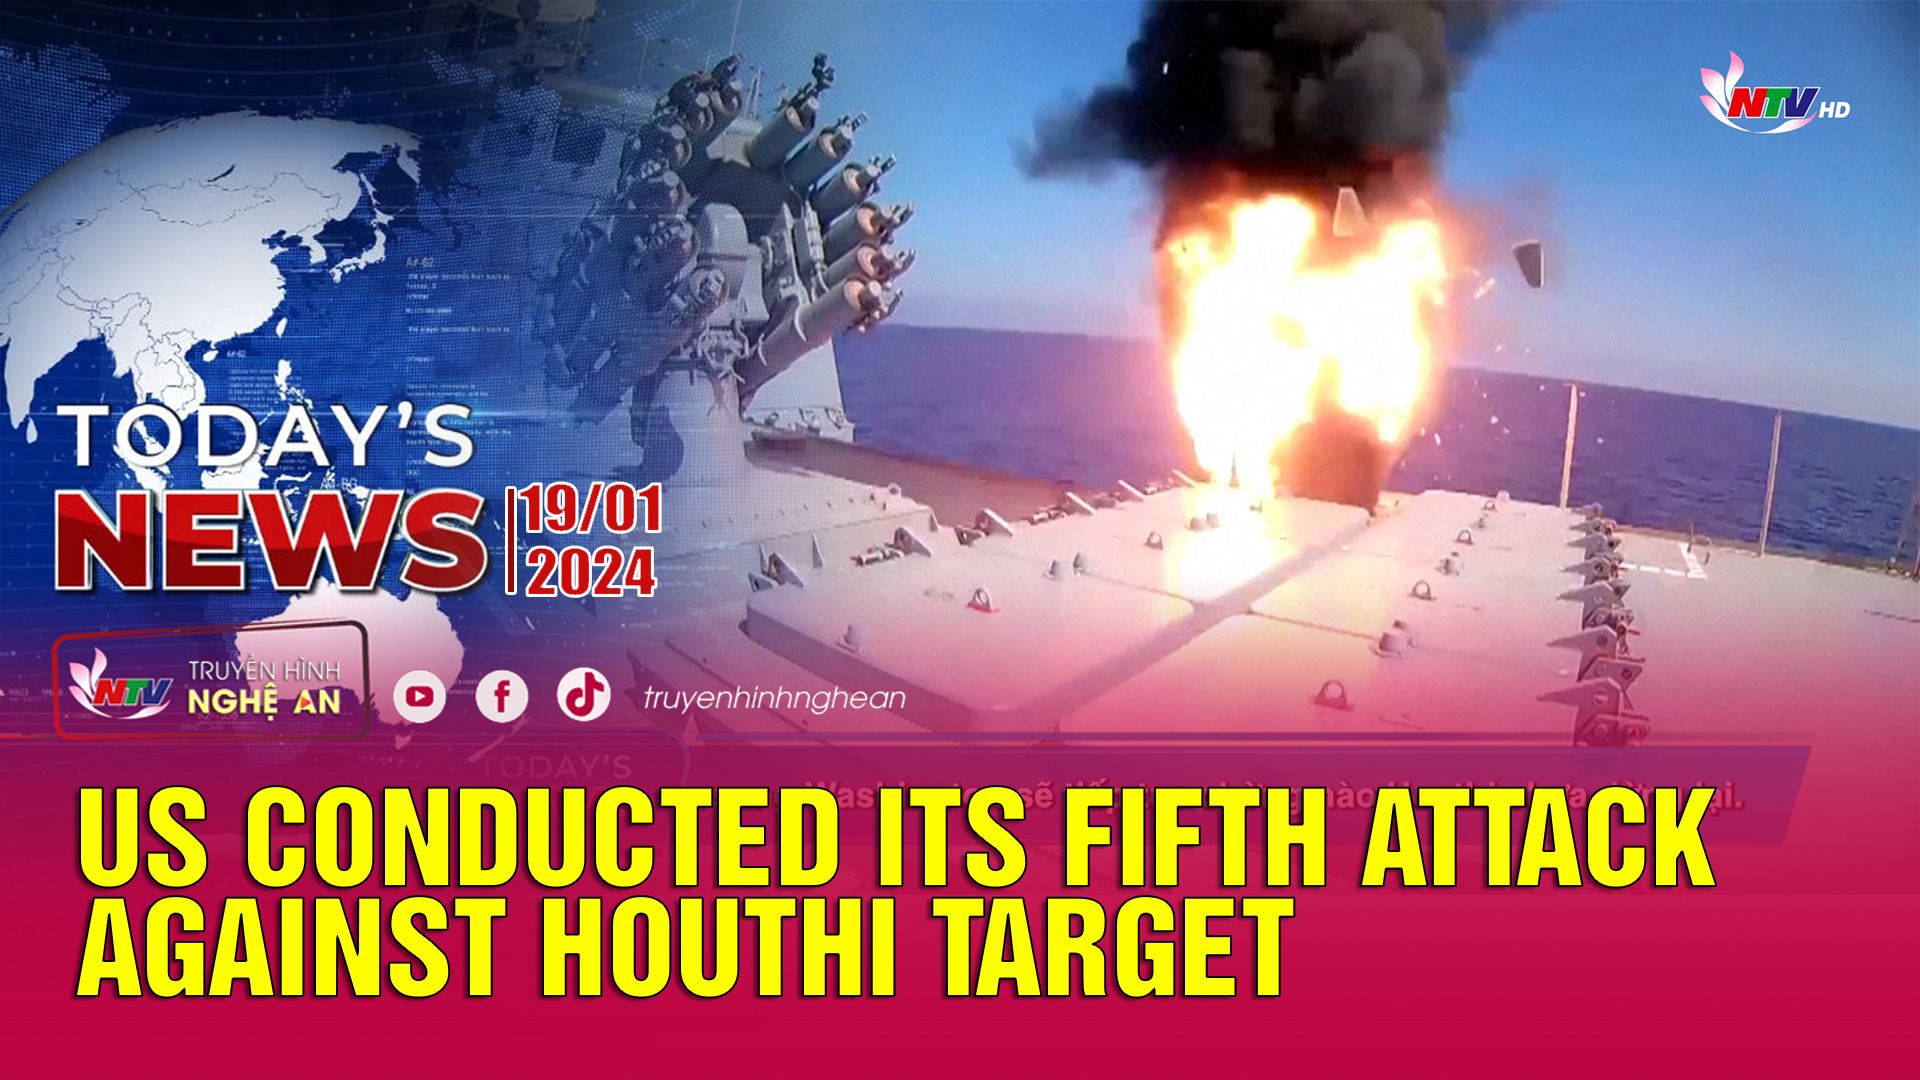 Today's News - 19/01/2024:  US conducted its fifth attack against Houthi targets